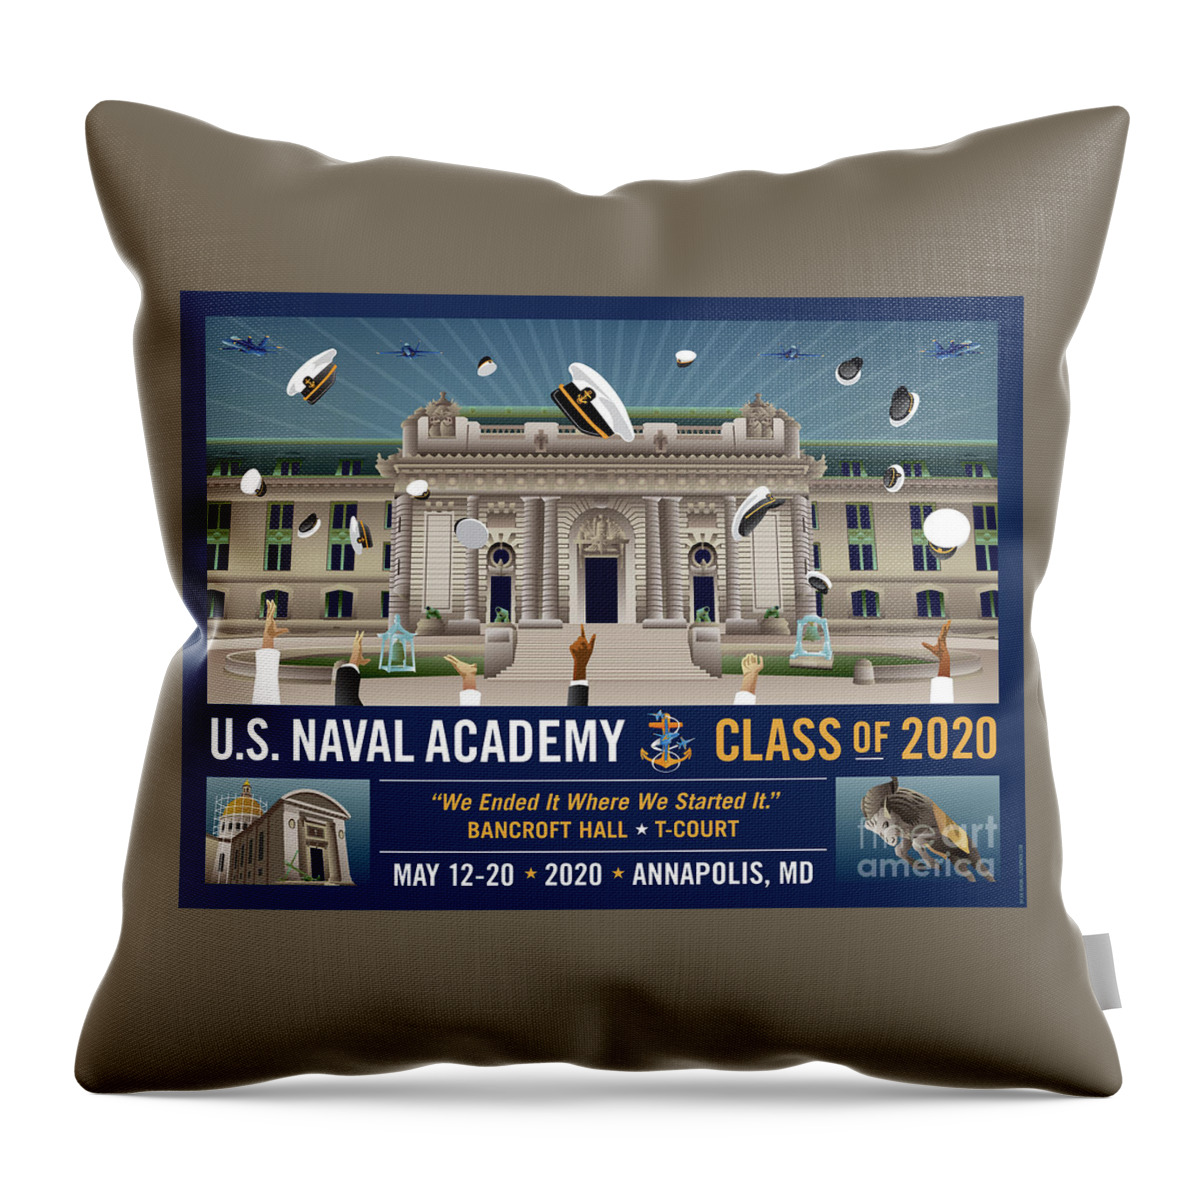 Usna Throw Pillow featuring the digital art USNA Class of 2020 Bancroft Hall T Court Celebration with Blue Angels by Joe Barsin